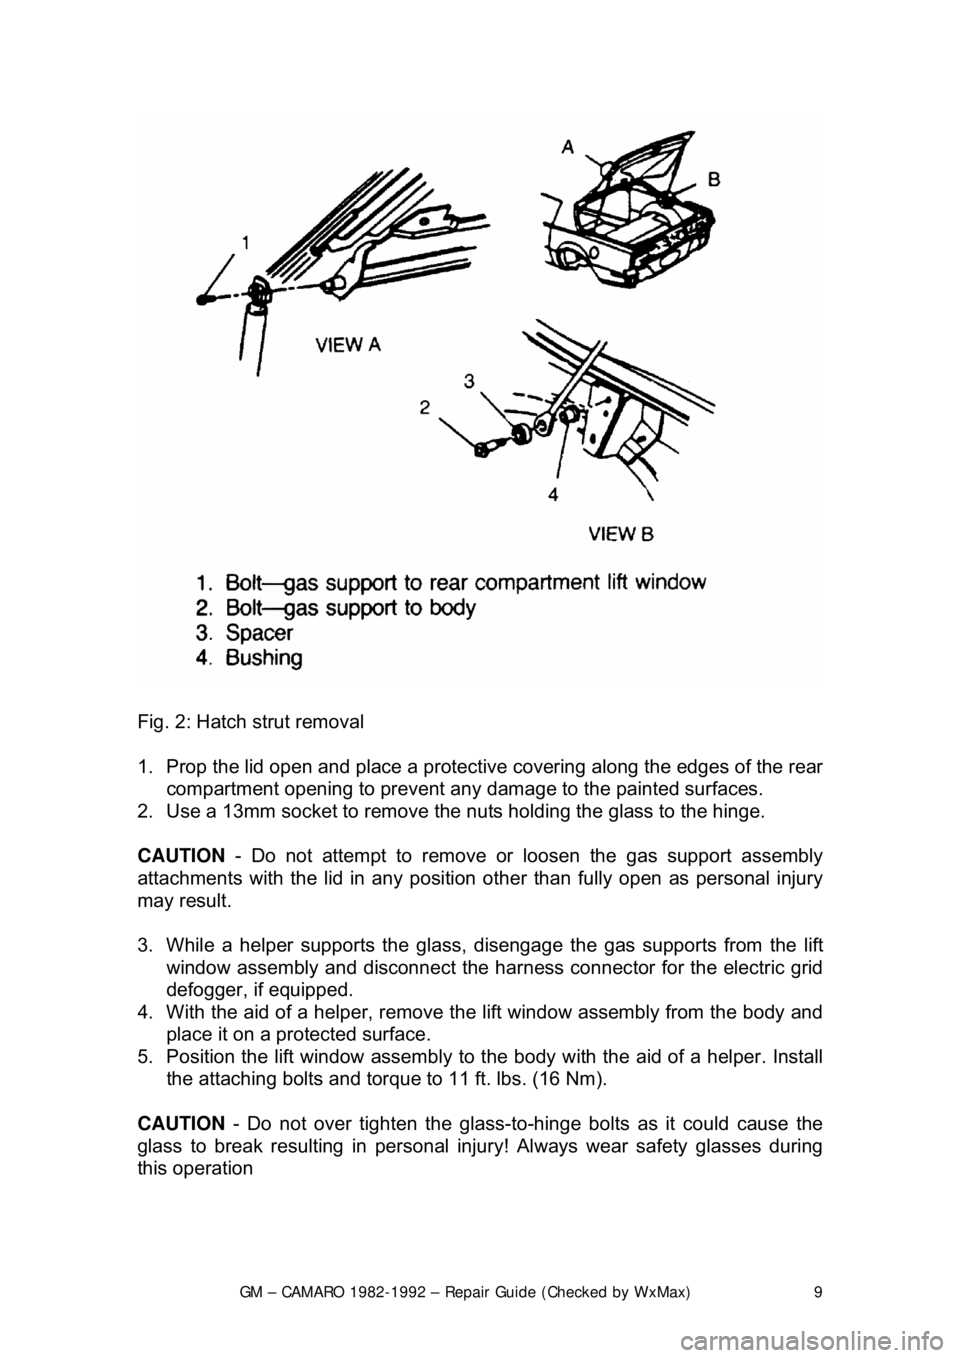 CHEVROLET CAMARO 1982  Repair Guide 
GM – CAMARO 1982-1992 – Repair Guide (Checked by WxMax) 9
 
Fig. 2: Hatch strut removal  
1.  Prop the lid open and place  a protective covering along the edges of the rear 
compartment opening t